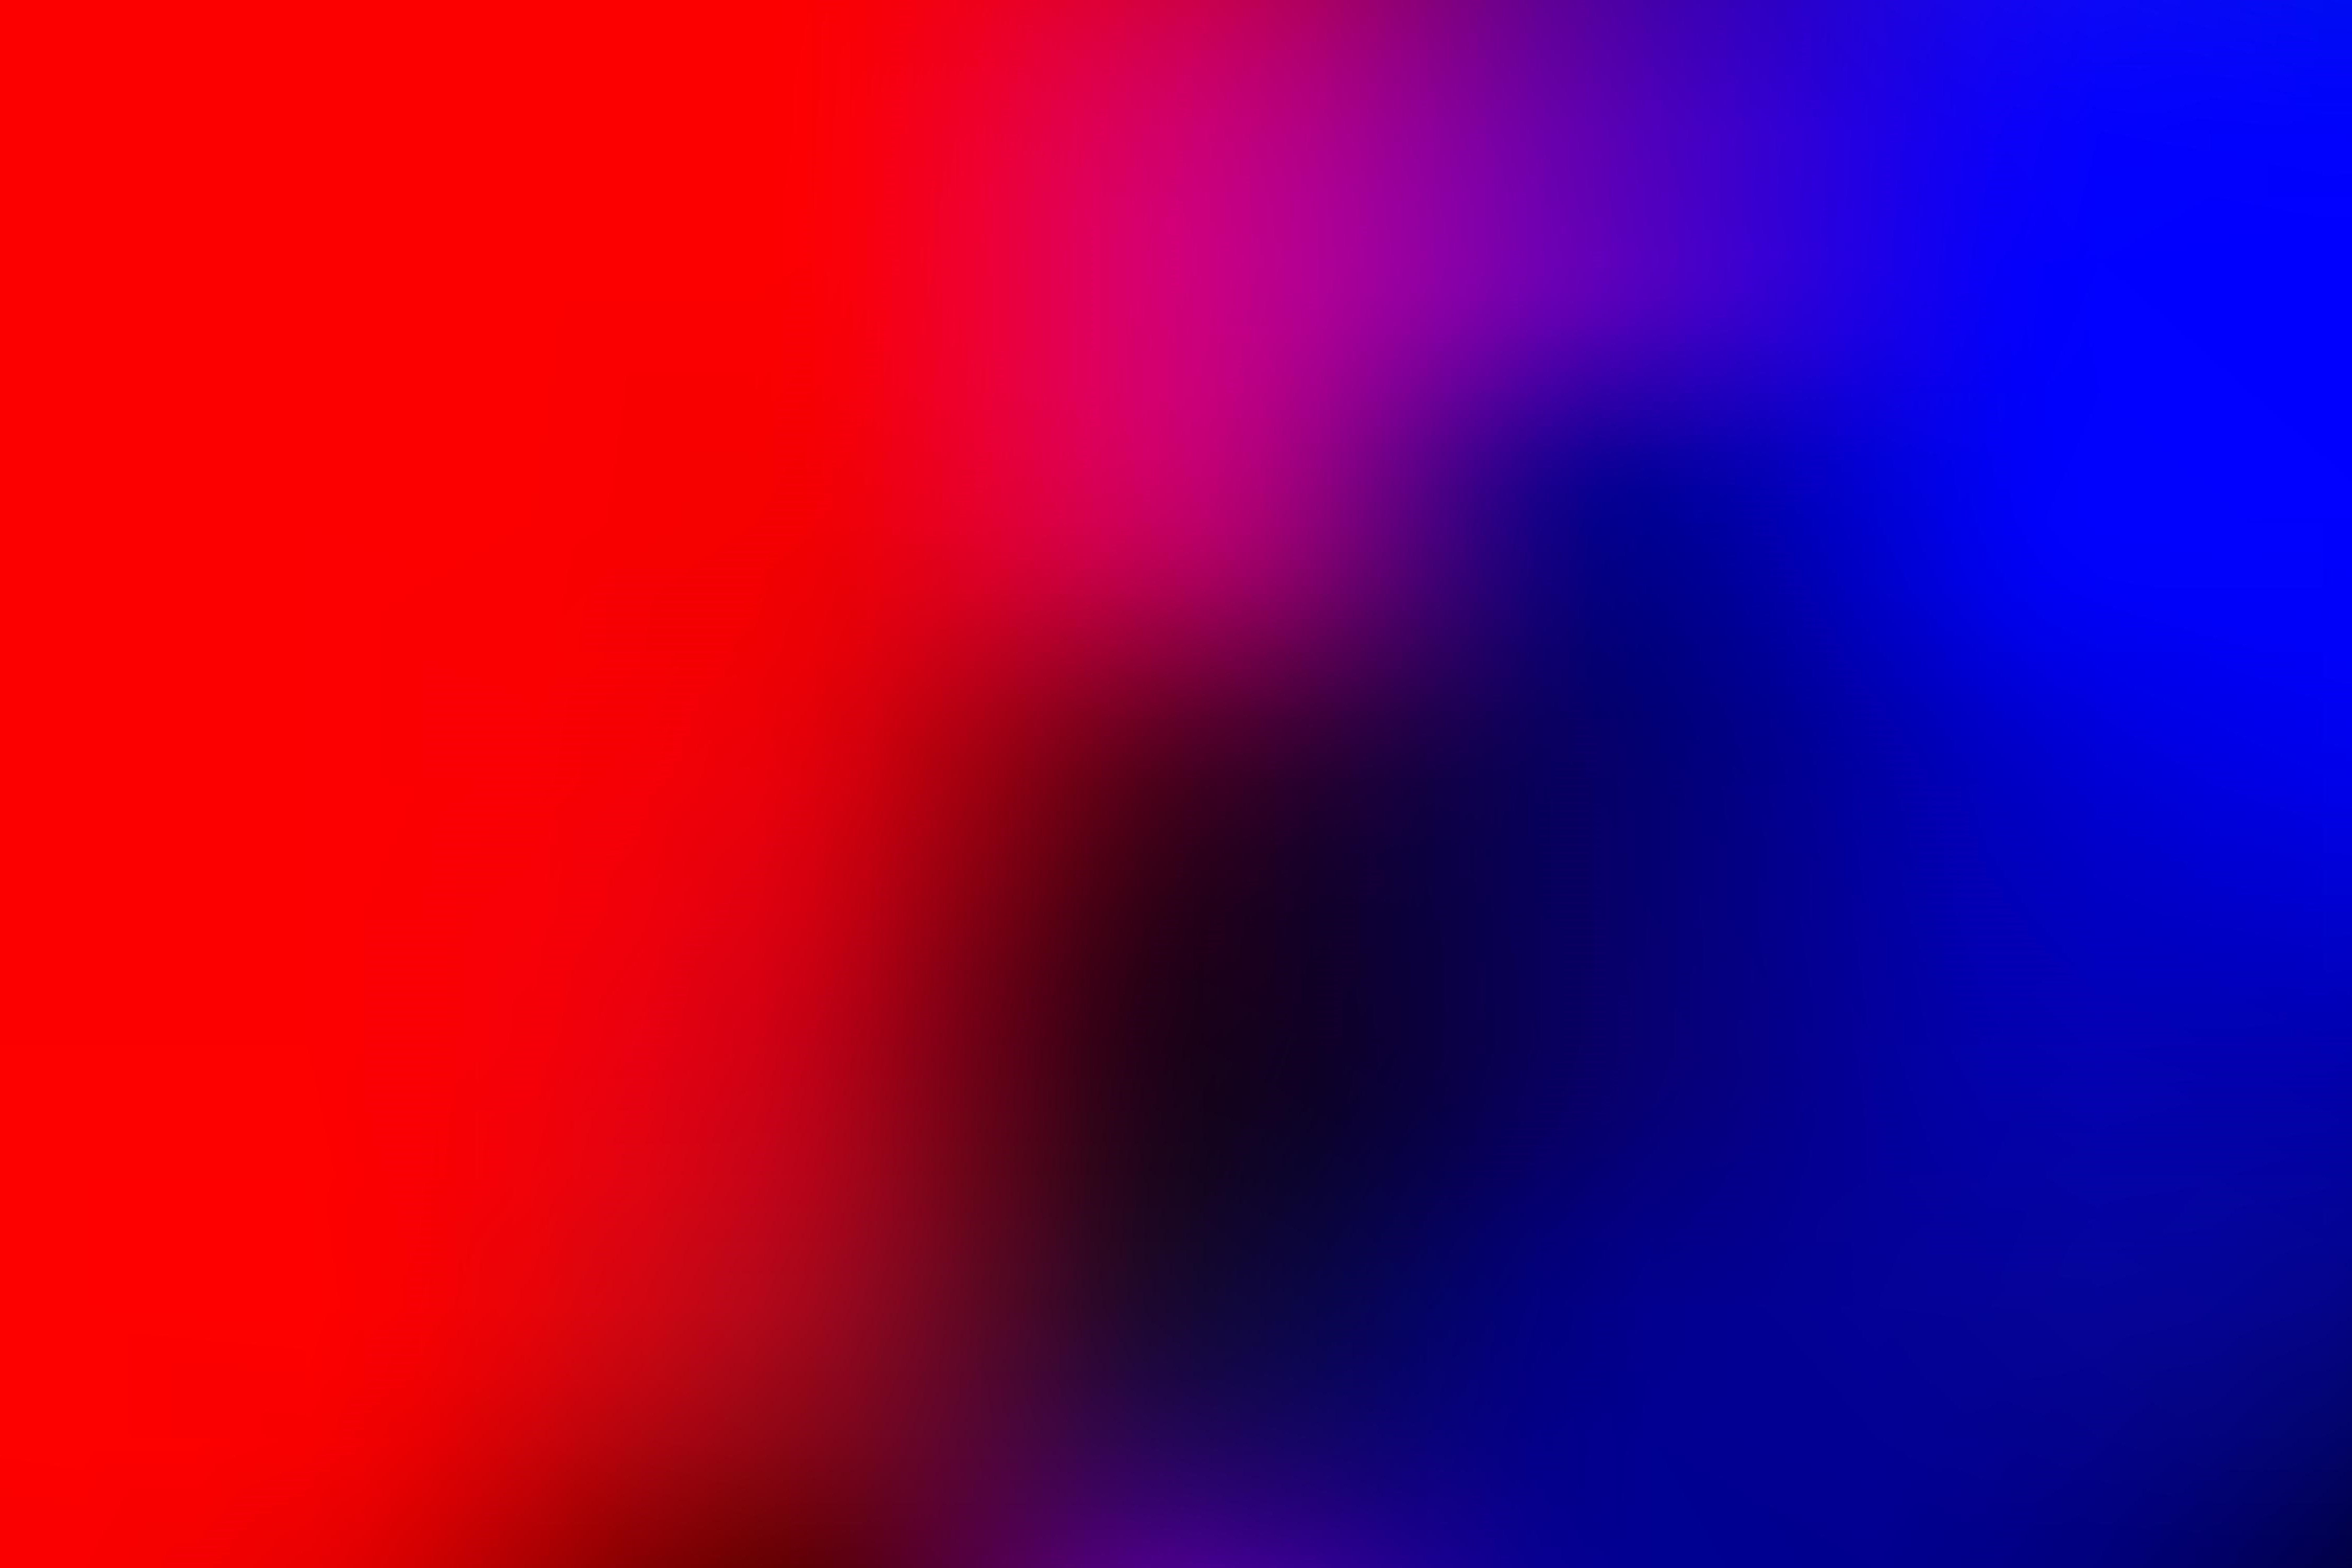 frequency-and-wavelength-comparing-red-and-blue-light-characteristics